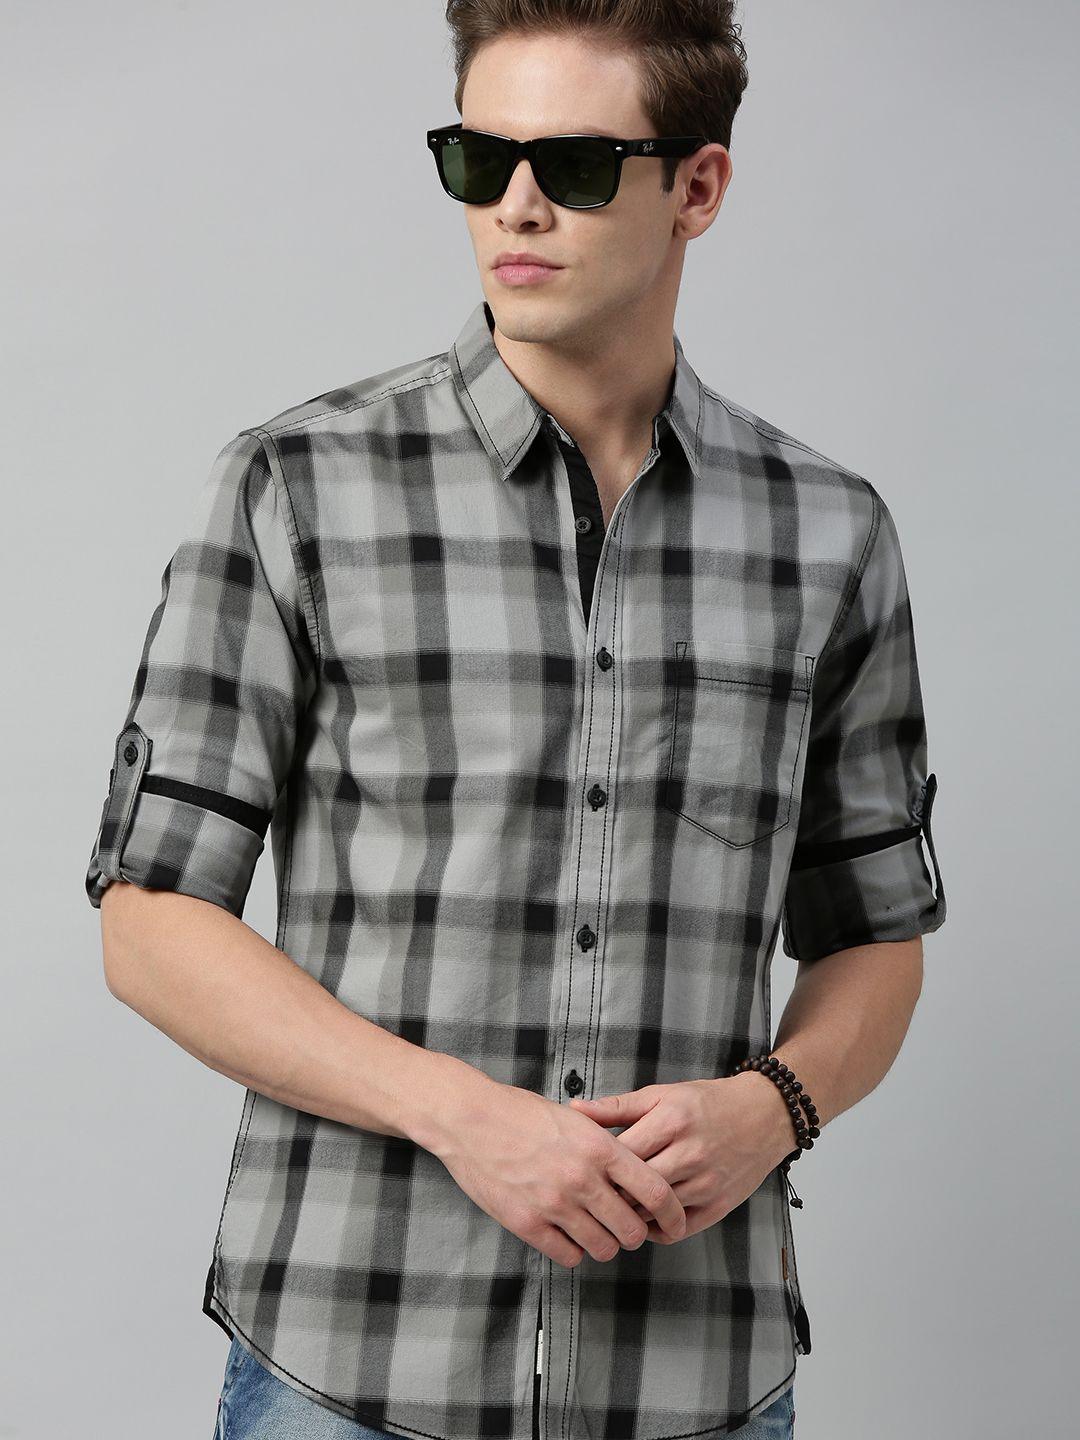 roadster-men-grey-&-black-regular-fit-checked-sustainable-casual-shirt